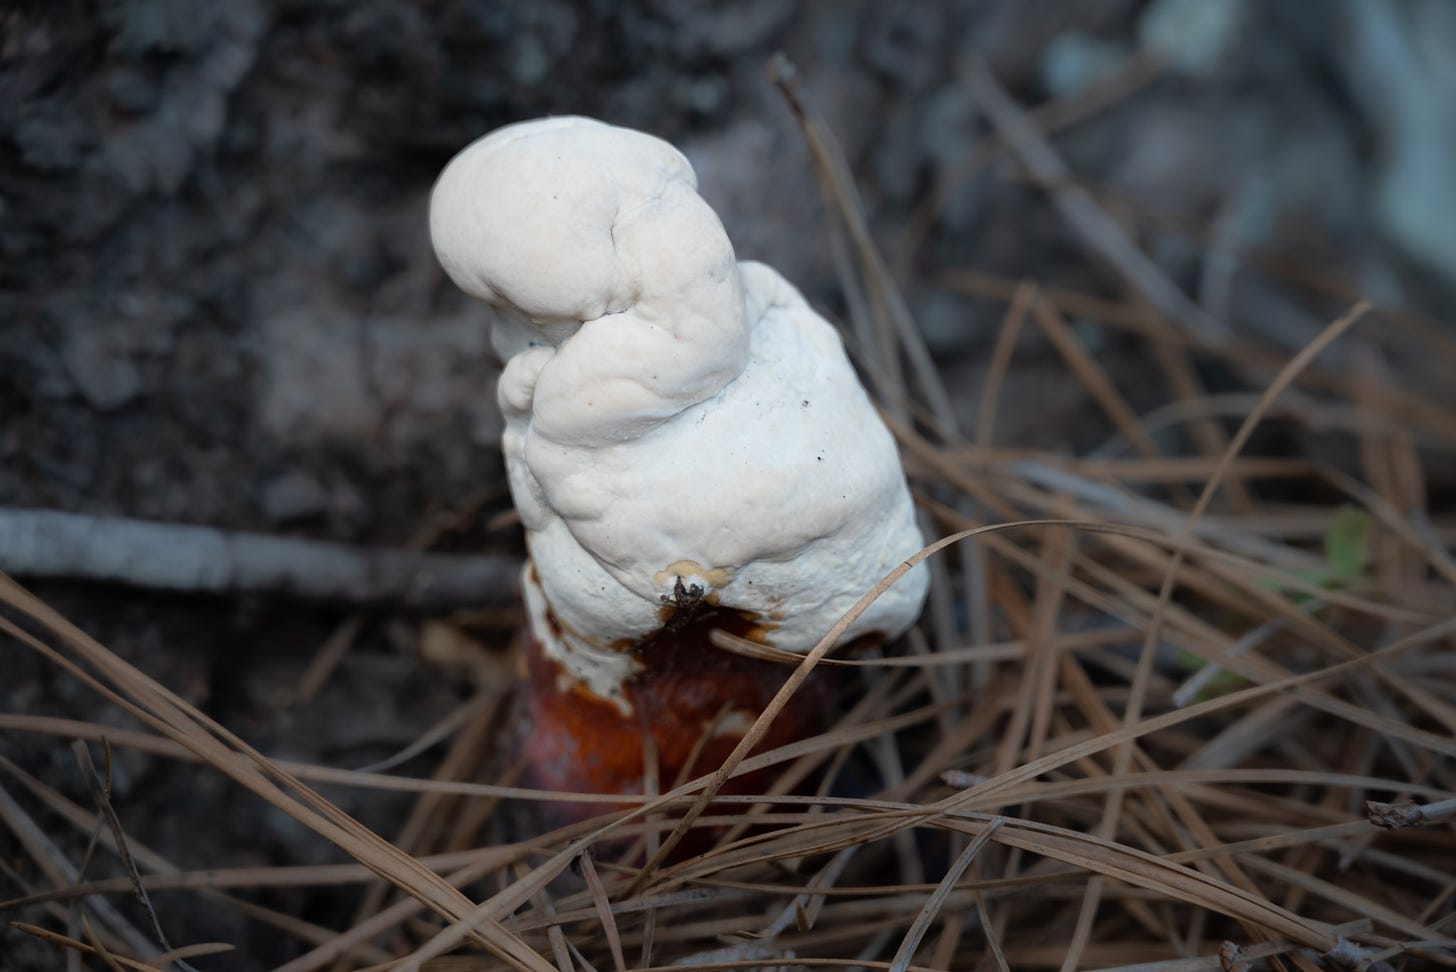 A white fungi growing at the base of a red bud tree in a strange shape that you could imaghine as a gnome, elf, man, or woman.